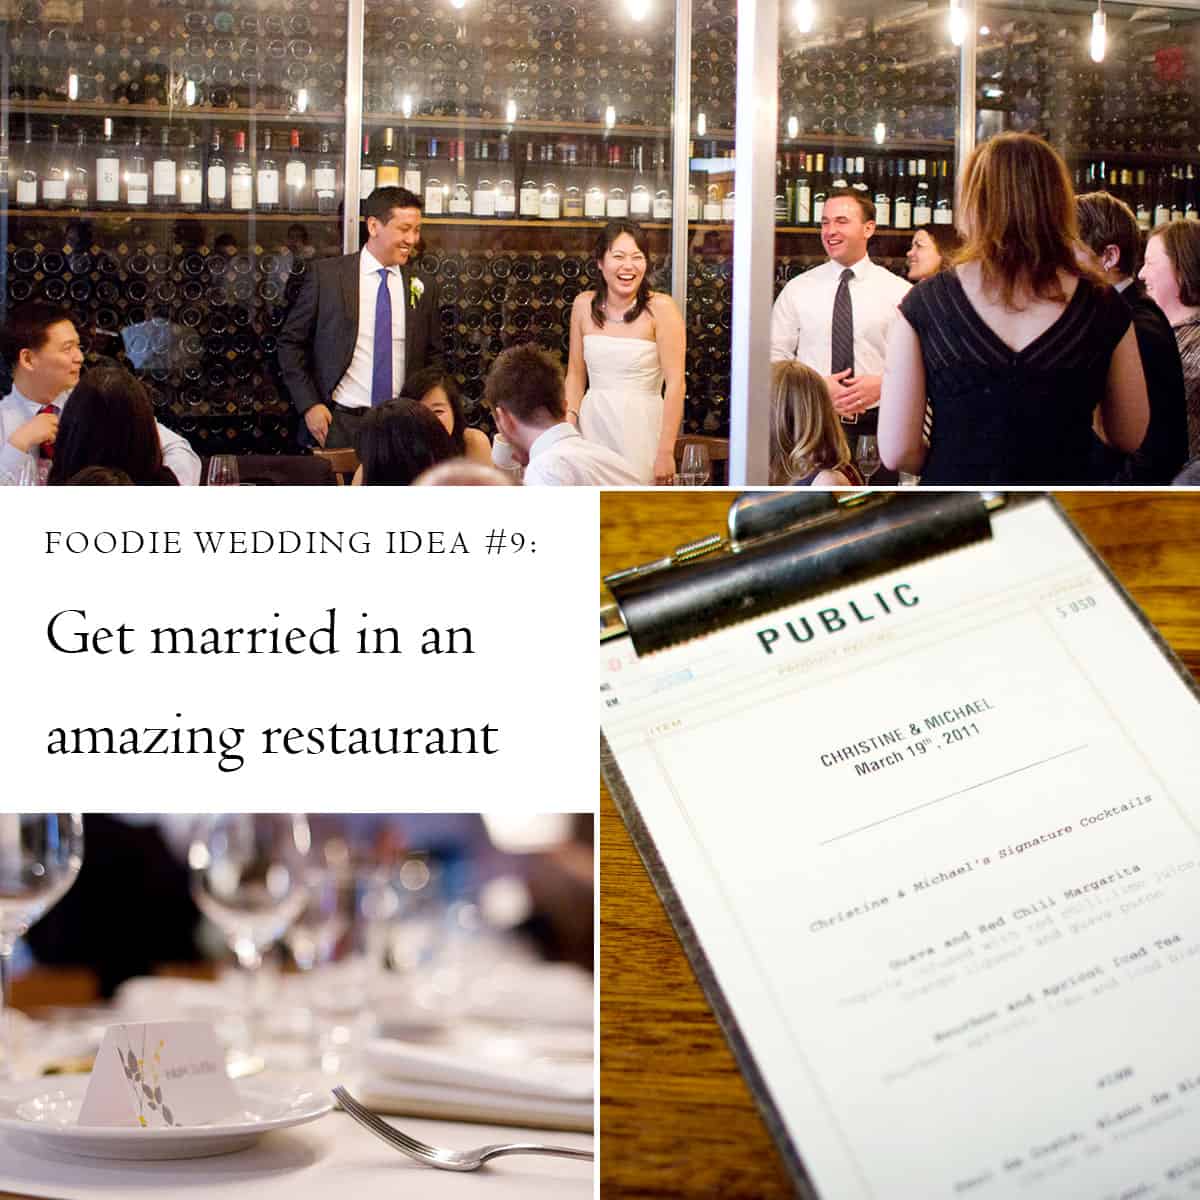 Foodie wedding idea: get married in an amazing restaurant; here, a wedding at NYC's Public Restaurant as photographed by Kyo Morishima